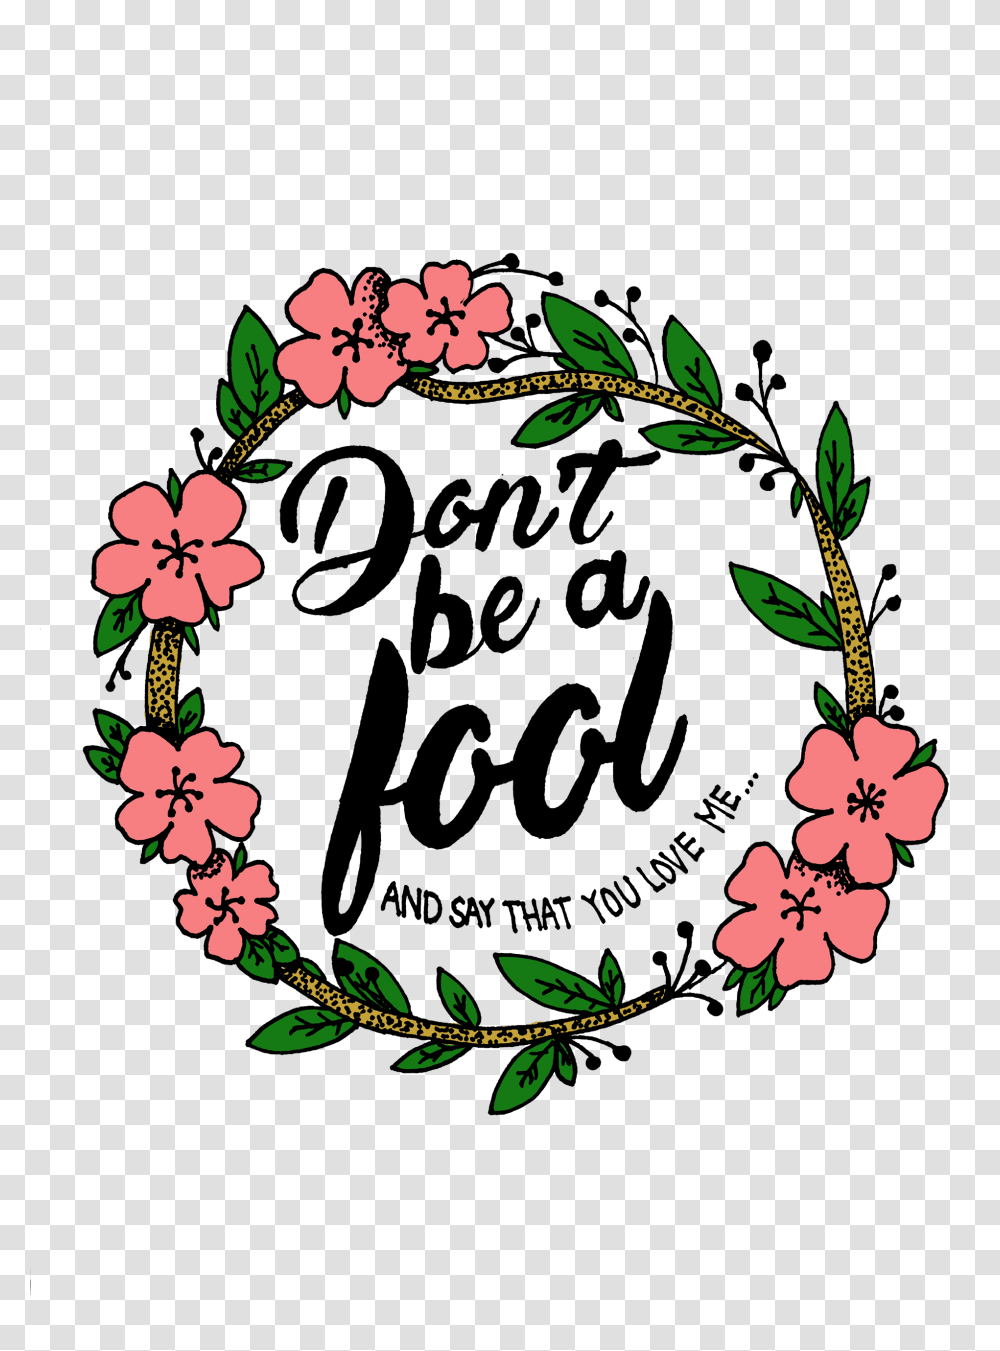 Popular And Trending Fool Stickers, Floral Design, Pattern Transparent Png